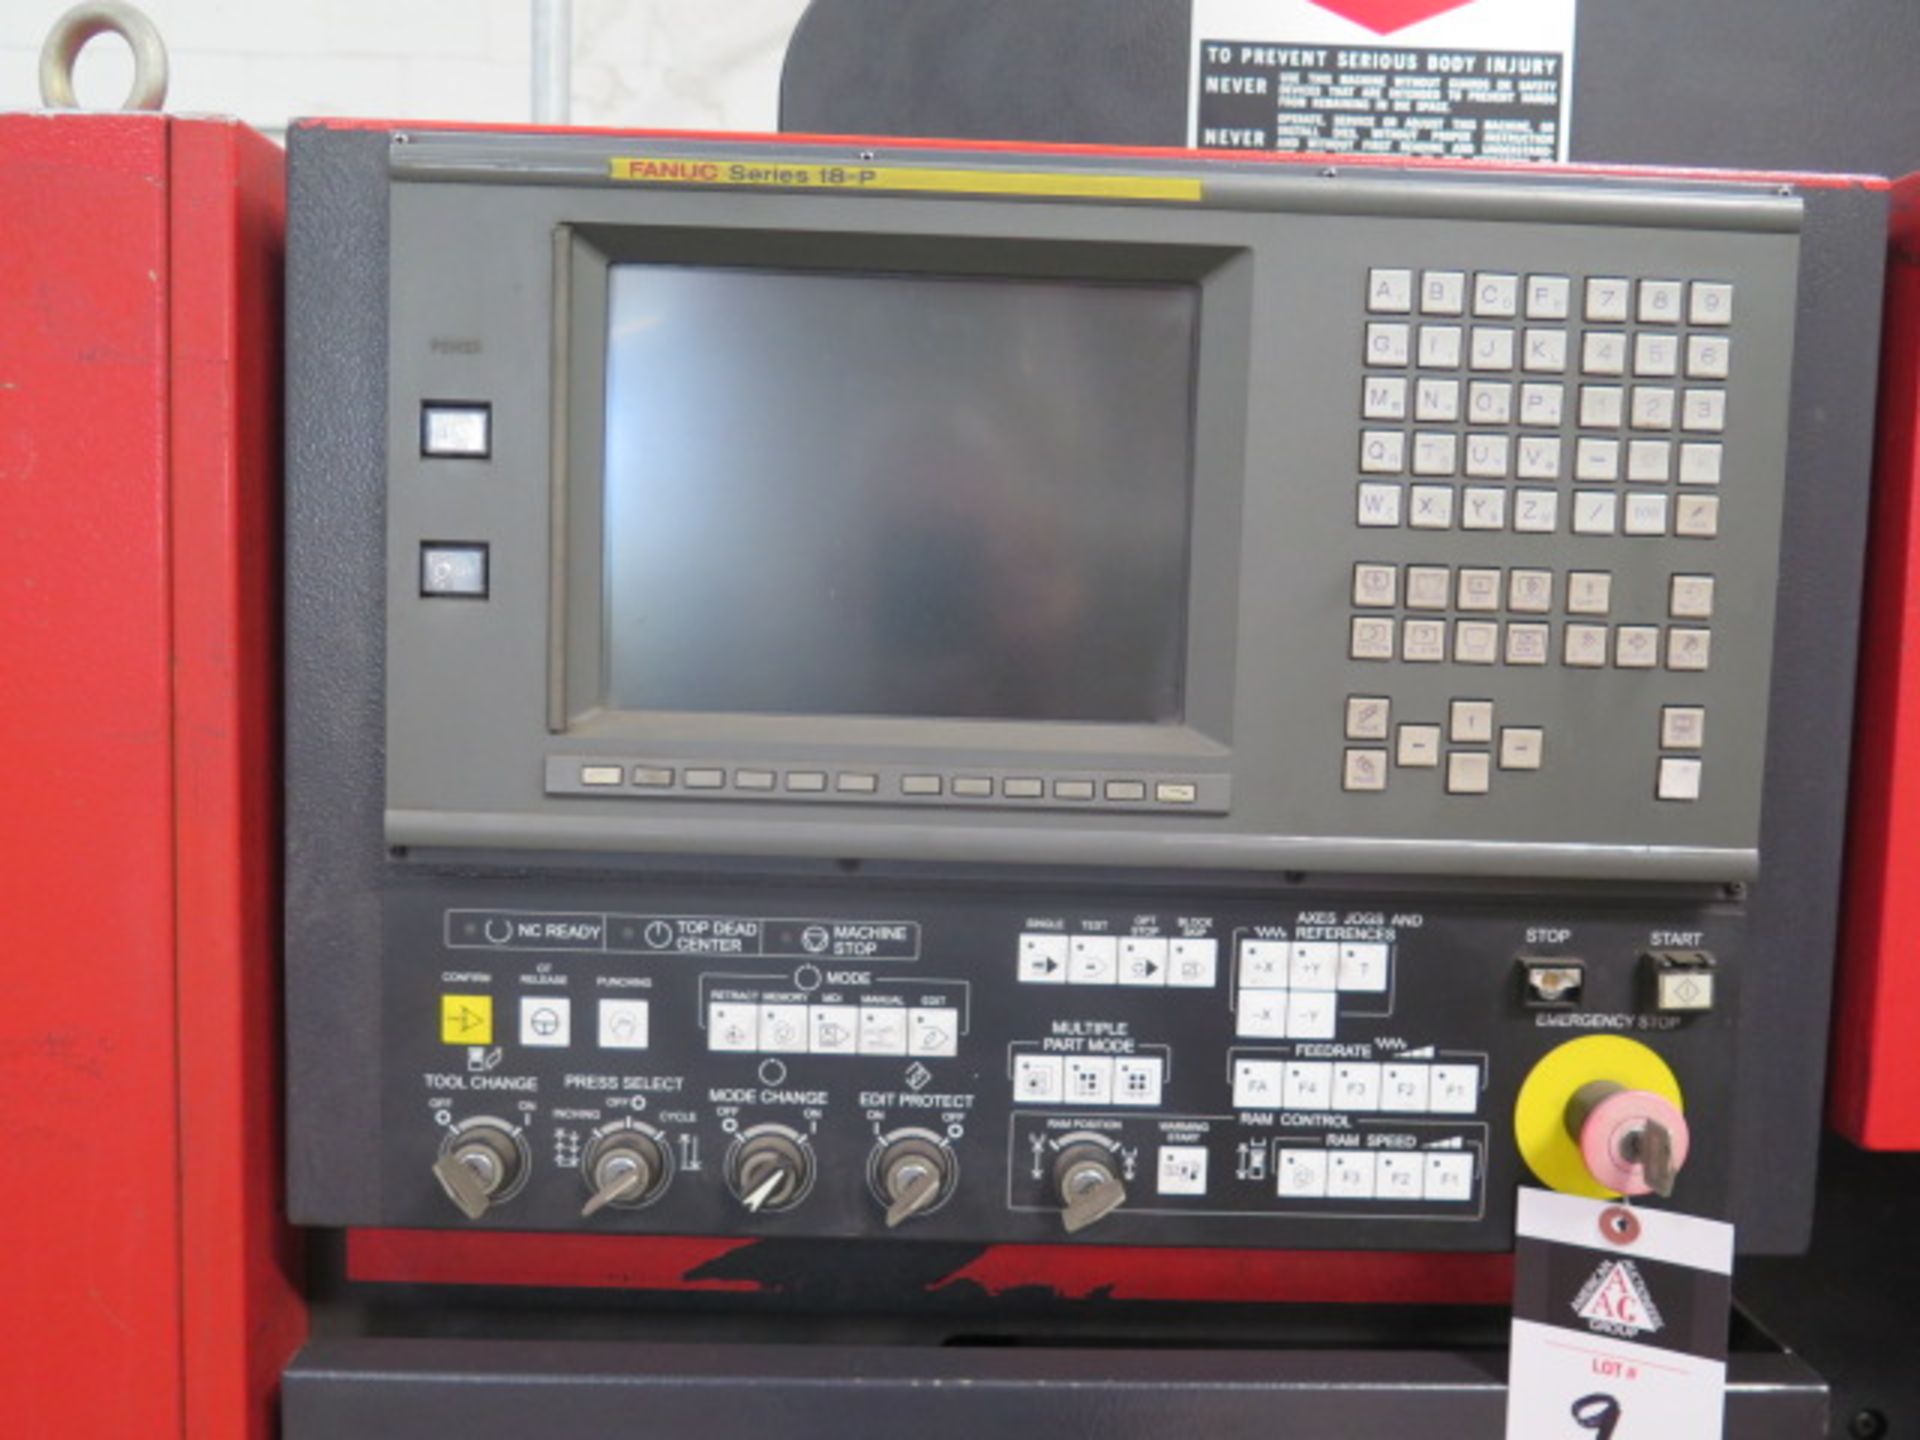 1998 Amada VIPROS 358 King II 30-Ton CNC Turret Punch Press s/n 35840083 w/ Fanuc 18-P, SOLD AS IS - Image 5 of 18